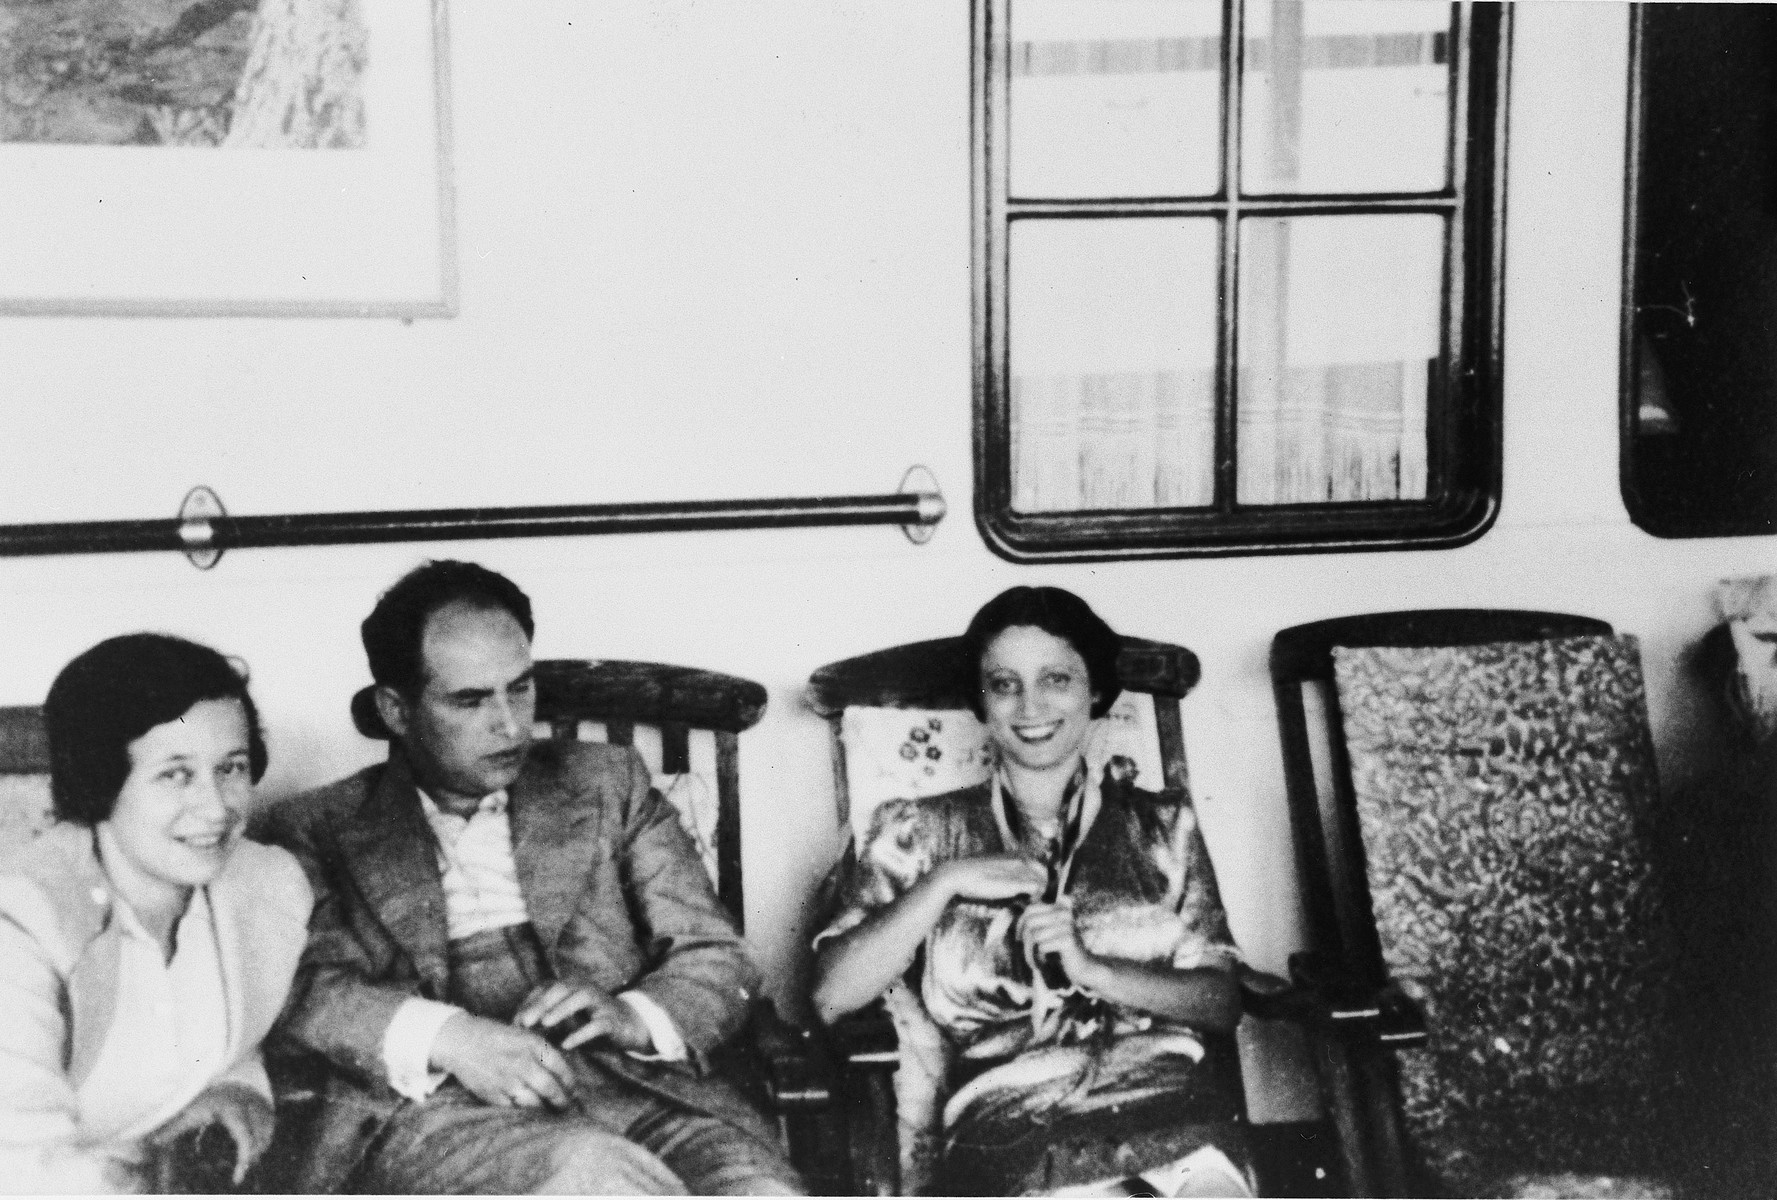 Three passengers relax on deck chairs on board the St. Louis.

From left to right are Irmgard and Josef Koeppel and Sofi Aron.